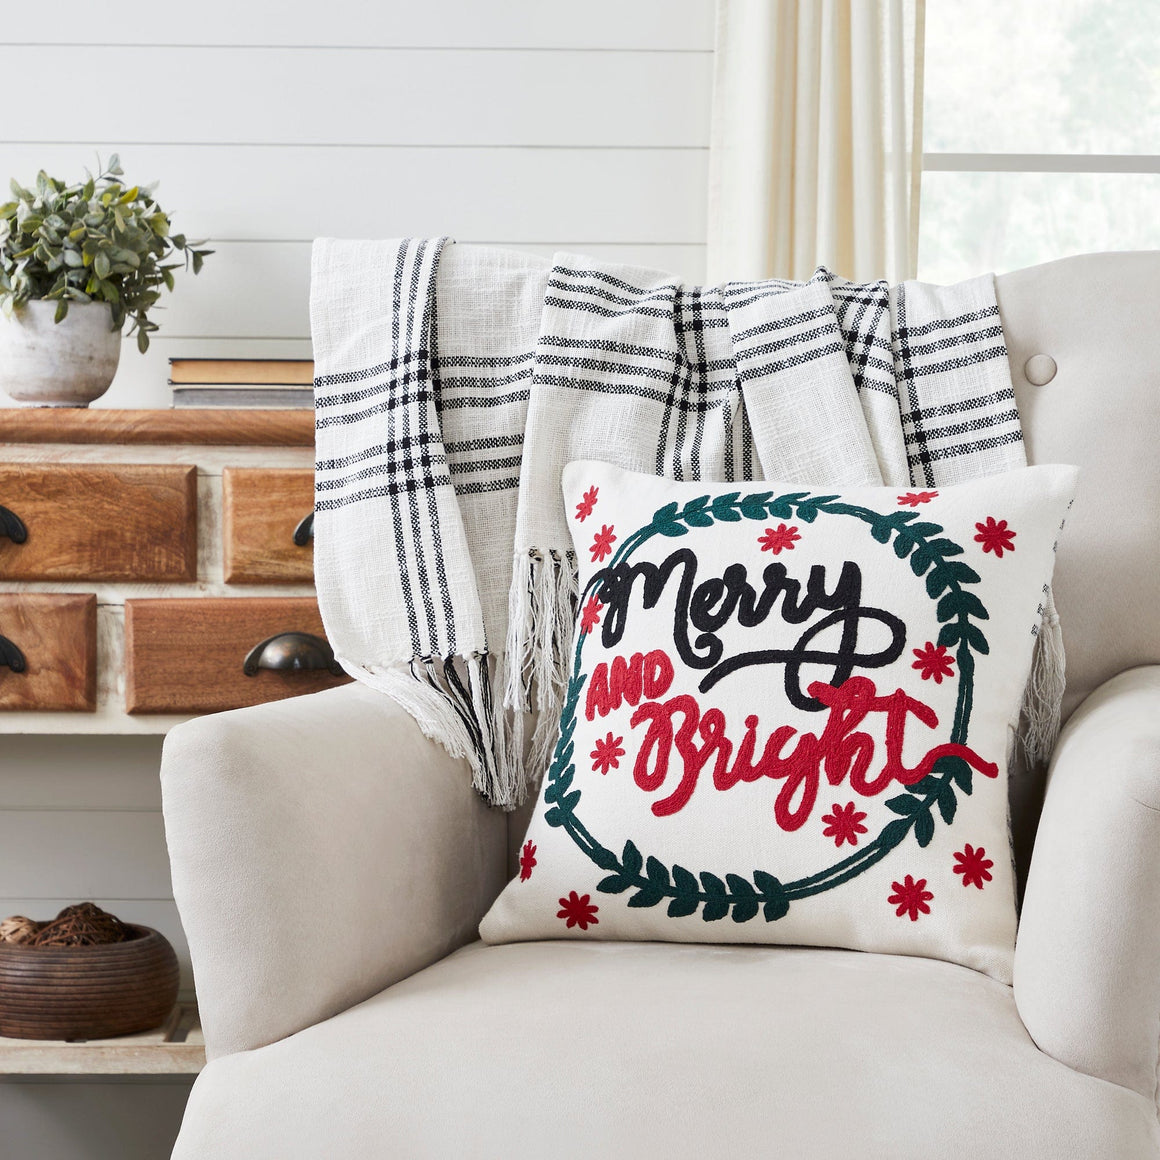 Merry and Bright Embroidered Pillow